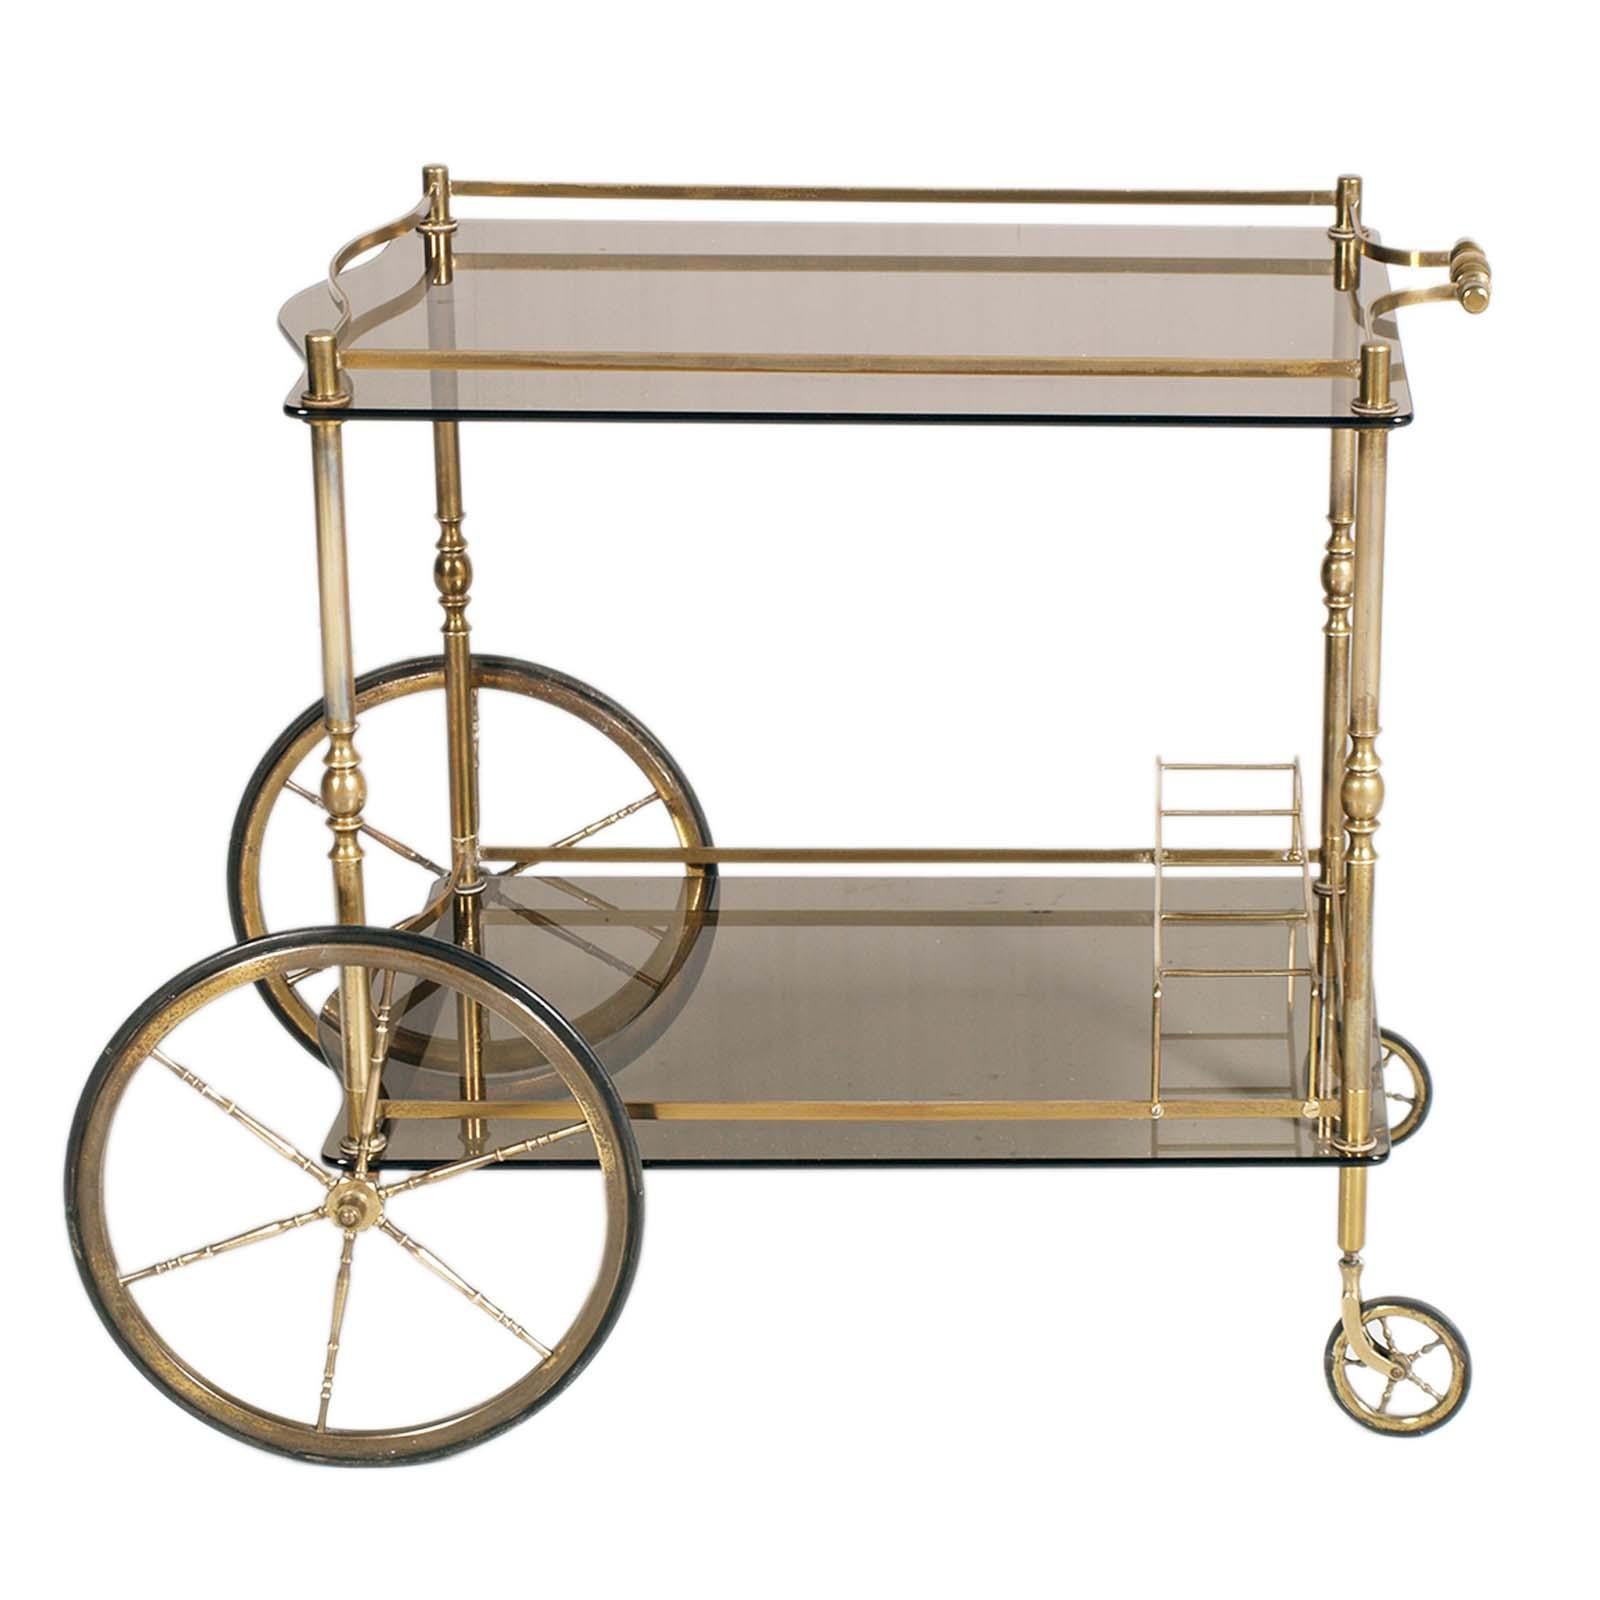 1950s Bar Cart by Aldo Tura for Danieli Hotel Venice in Golden Brass with two Tops Glass Fumè .
This bar trolley is of very classic designs and differs from the later production of the designer


Aldo Tura is an Italian designer, who established his